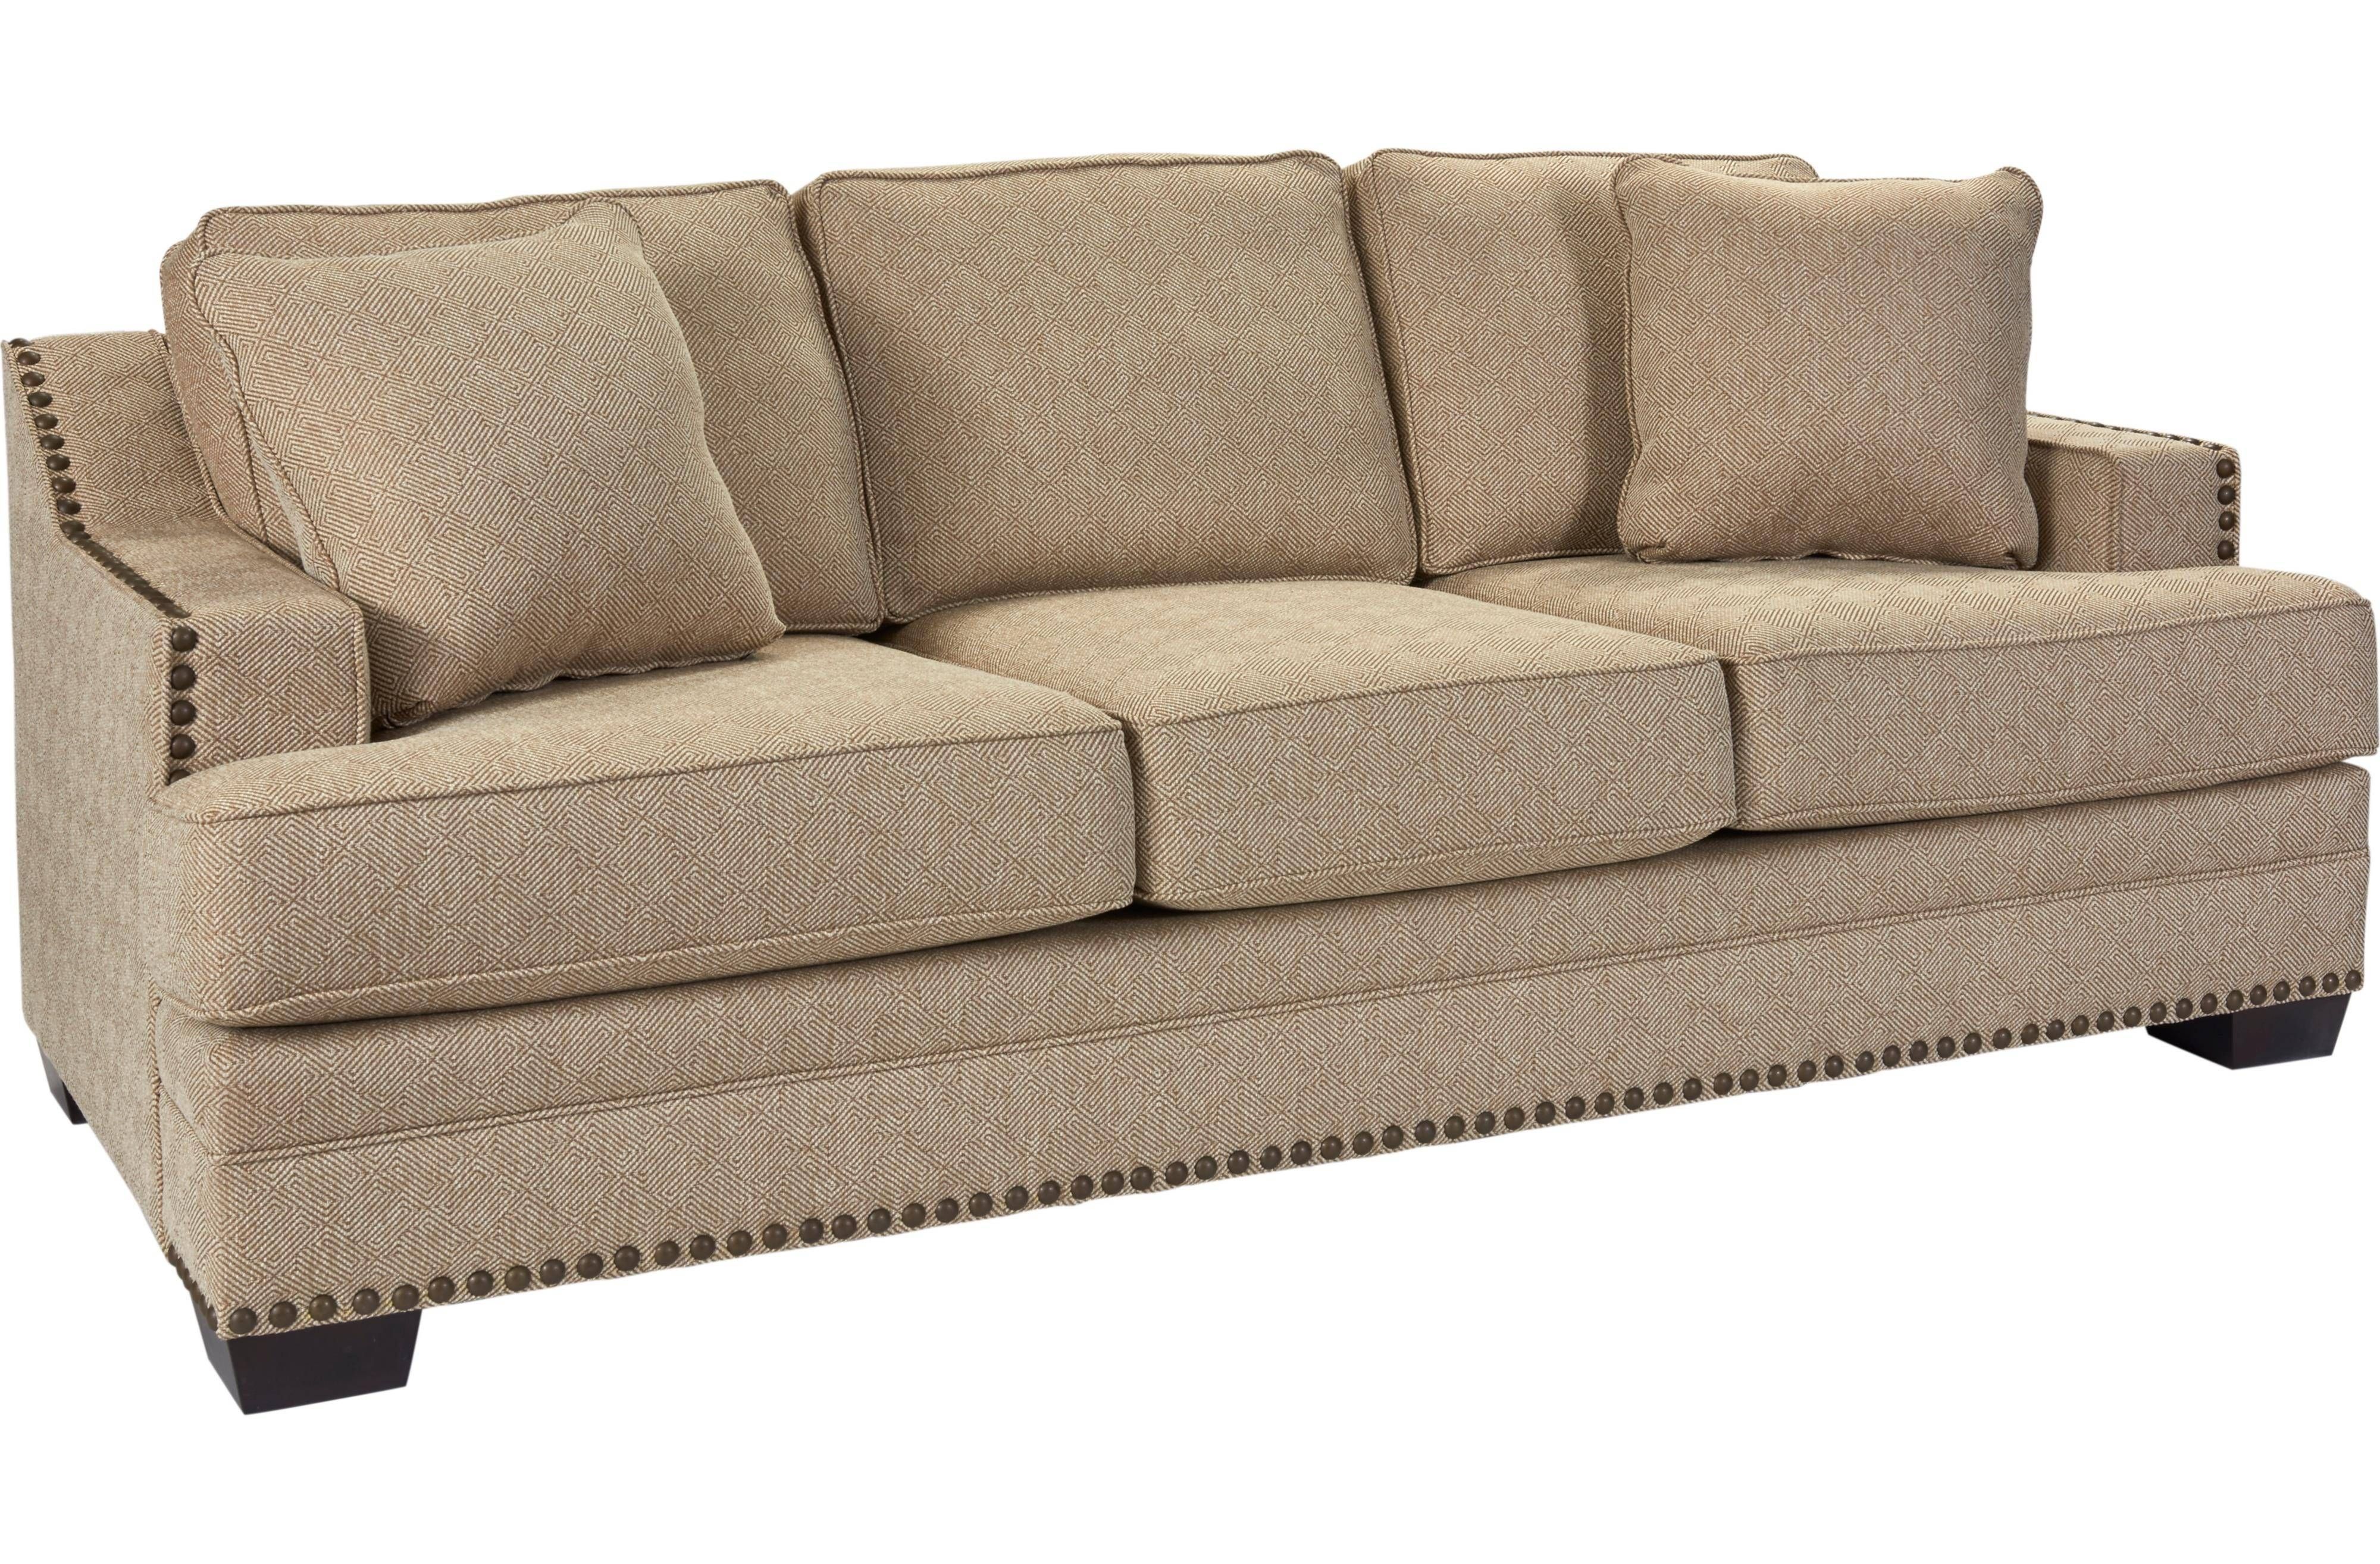 Broyhill Furniture Estes Park Contemporary Sofa With Nailhead Trim Inside Broyhill Sectional Sofas (View 26 of 30)